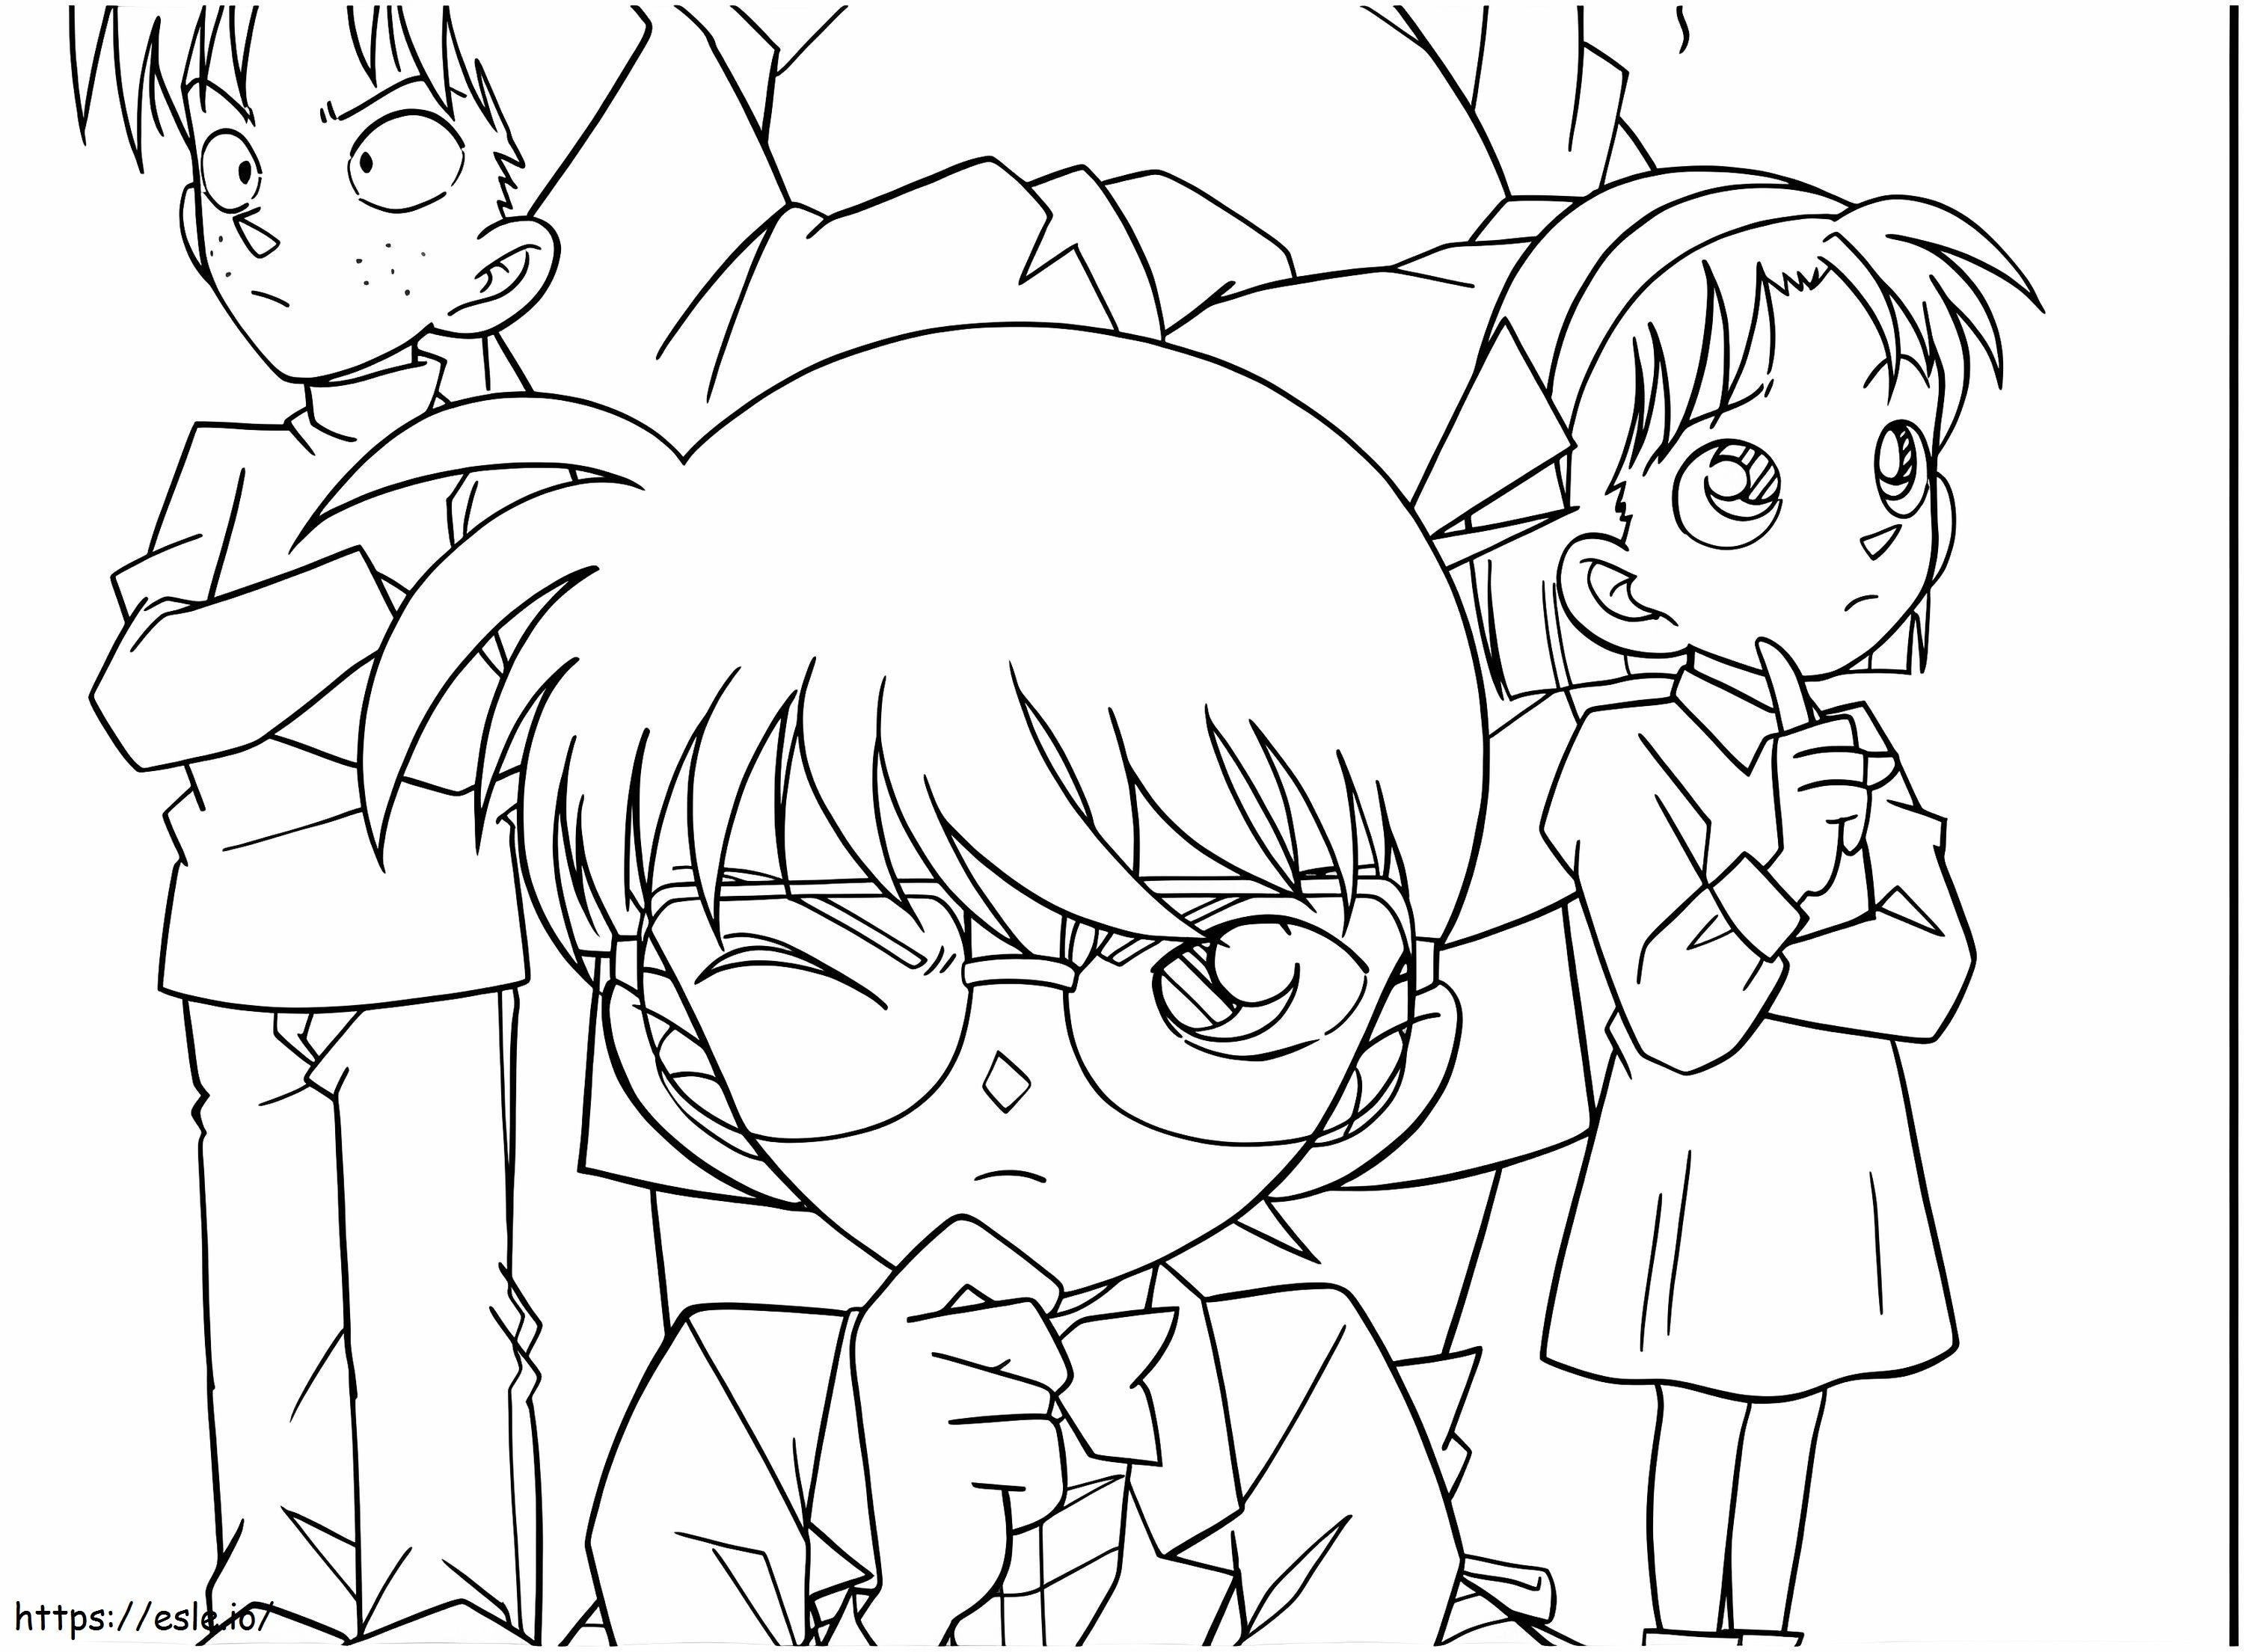 Conan And Friends coloring page